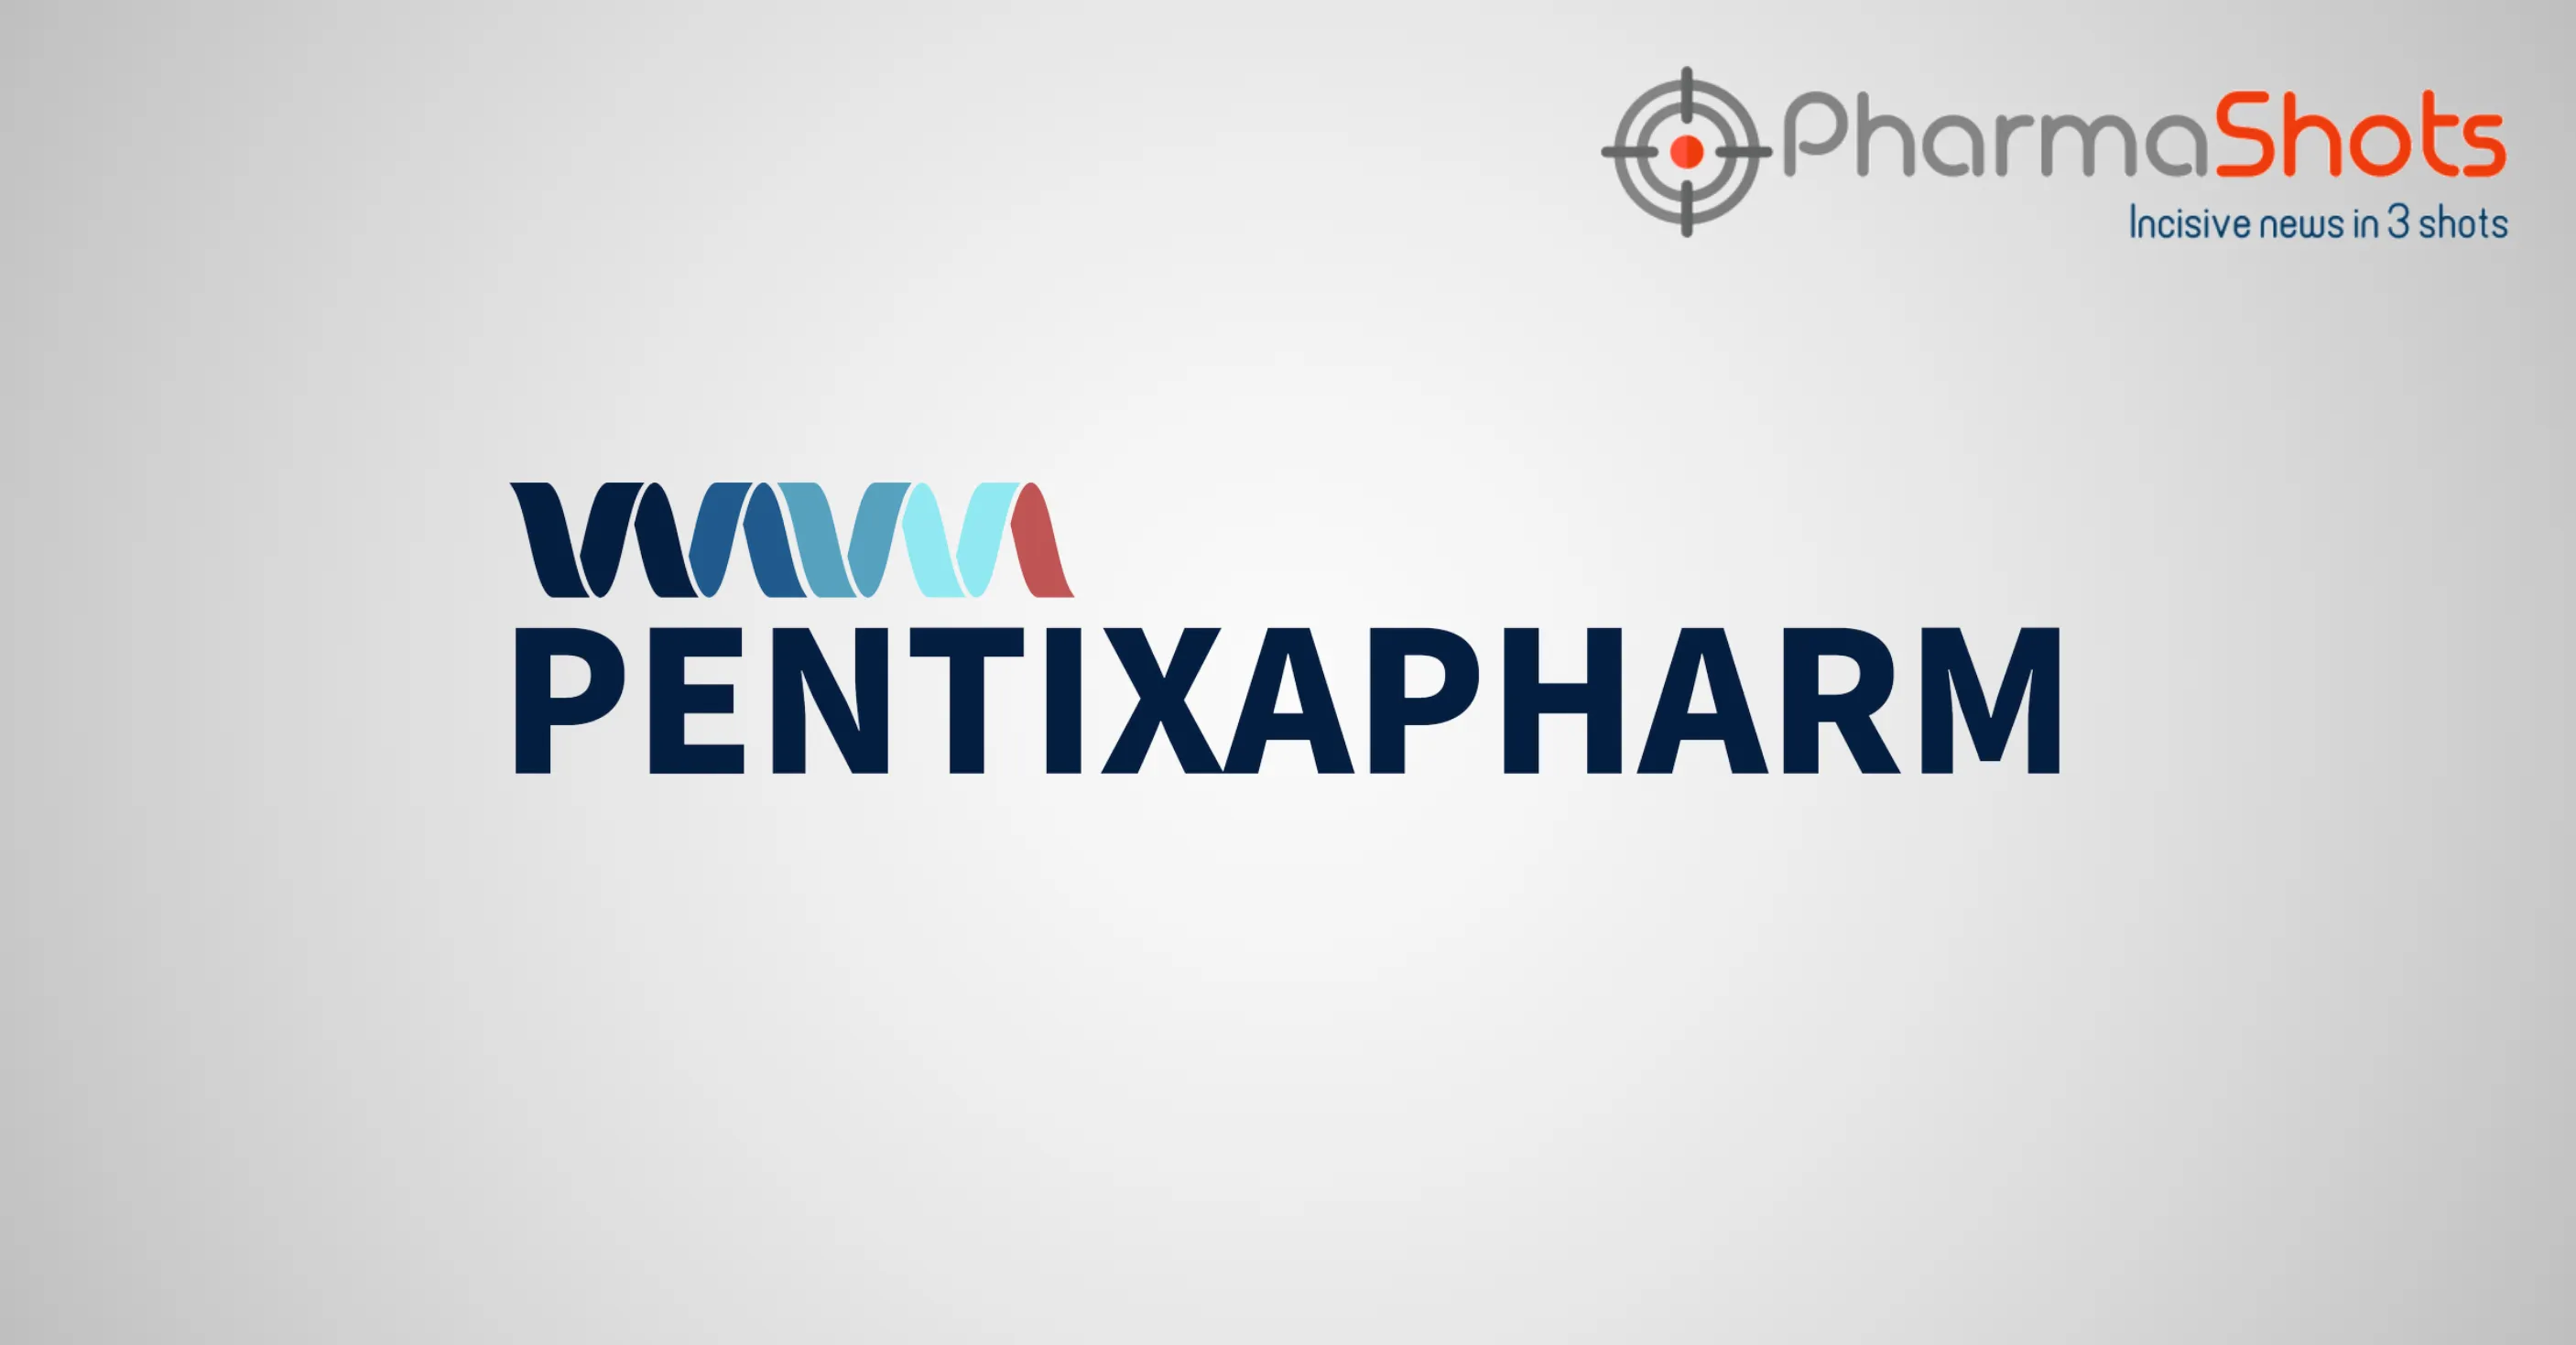 Pentixapharm Reports the Acquisition of Glycotope’s Target Discovery Business